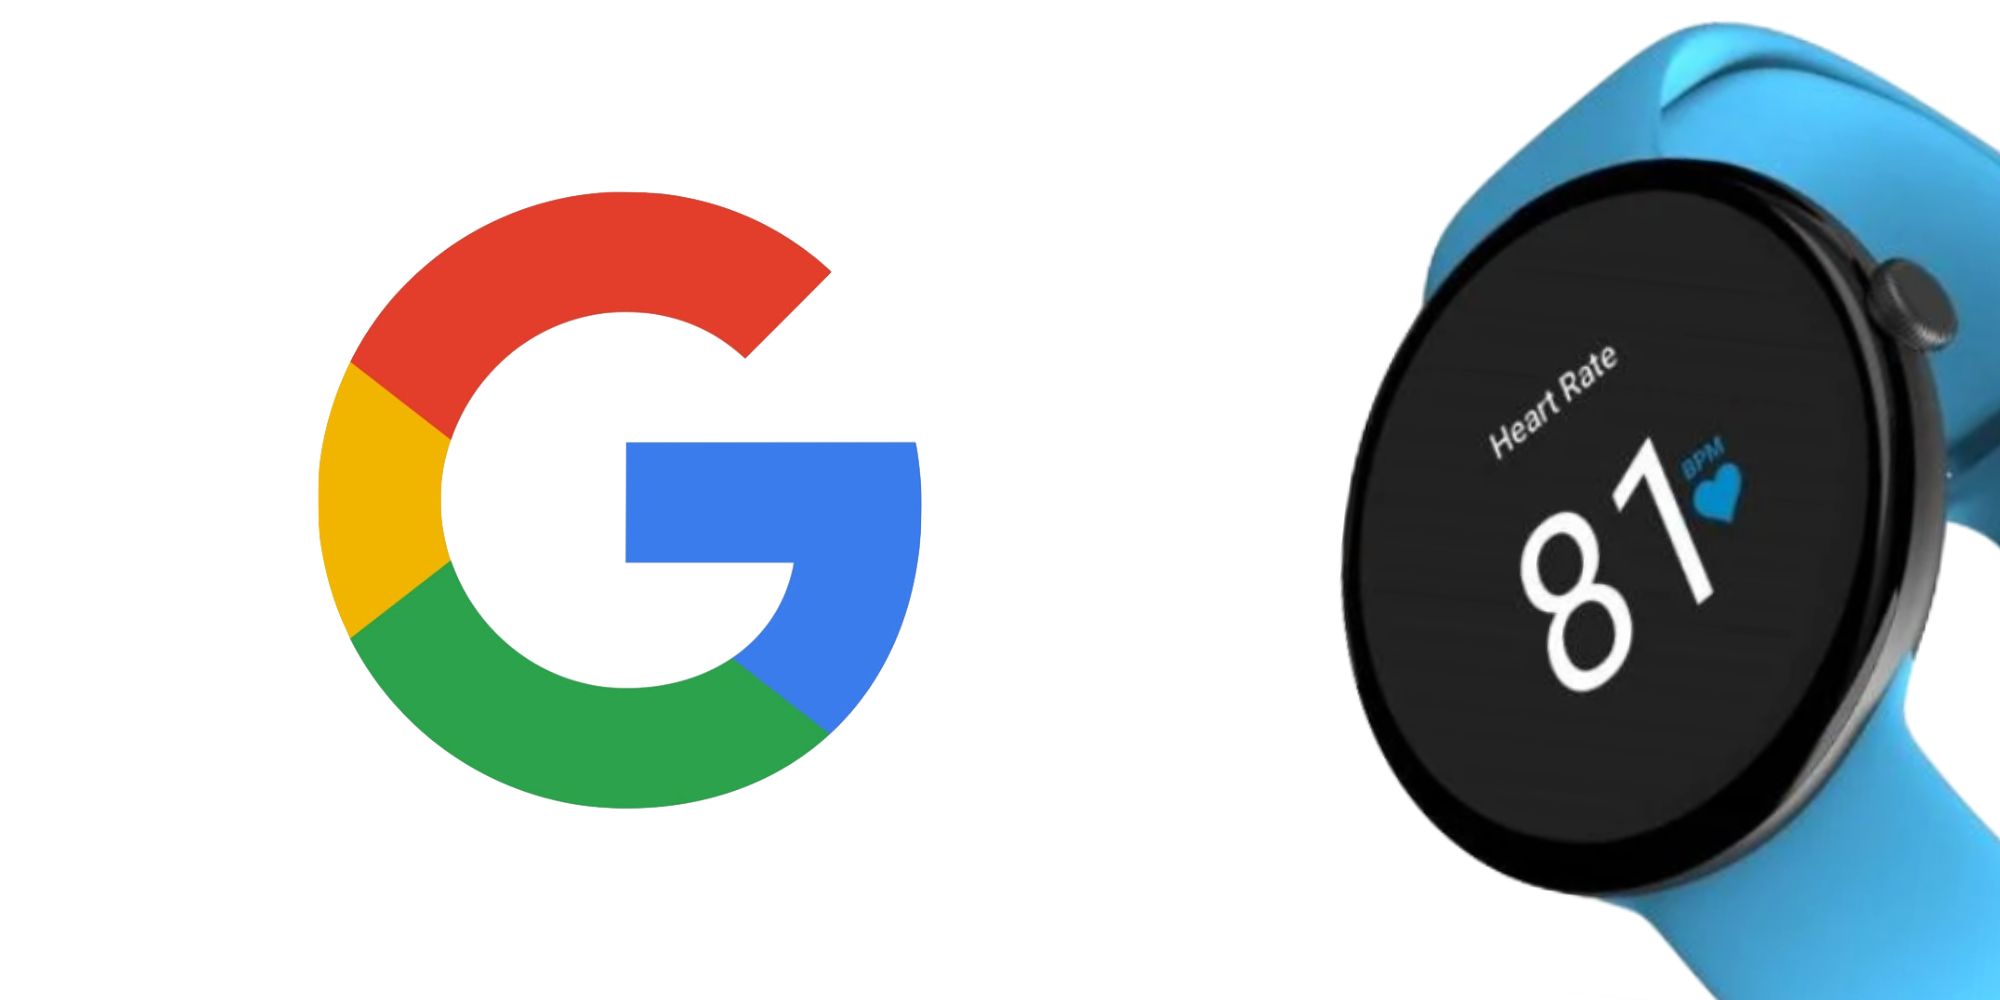 Google’s First Smartwatch Will Likely Be Named Pixel Watch